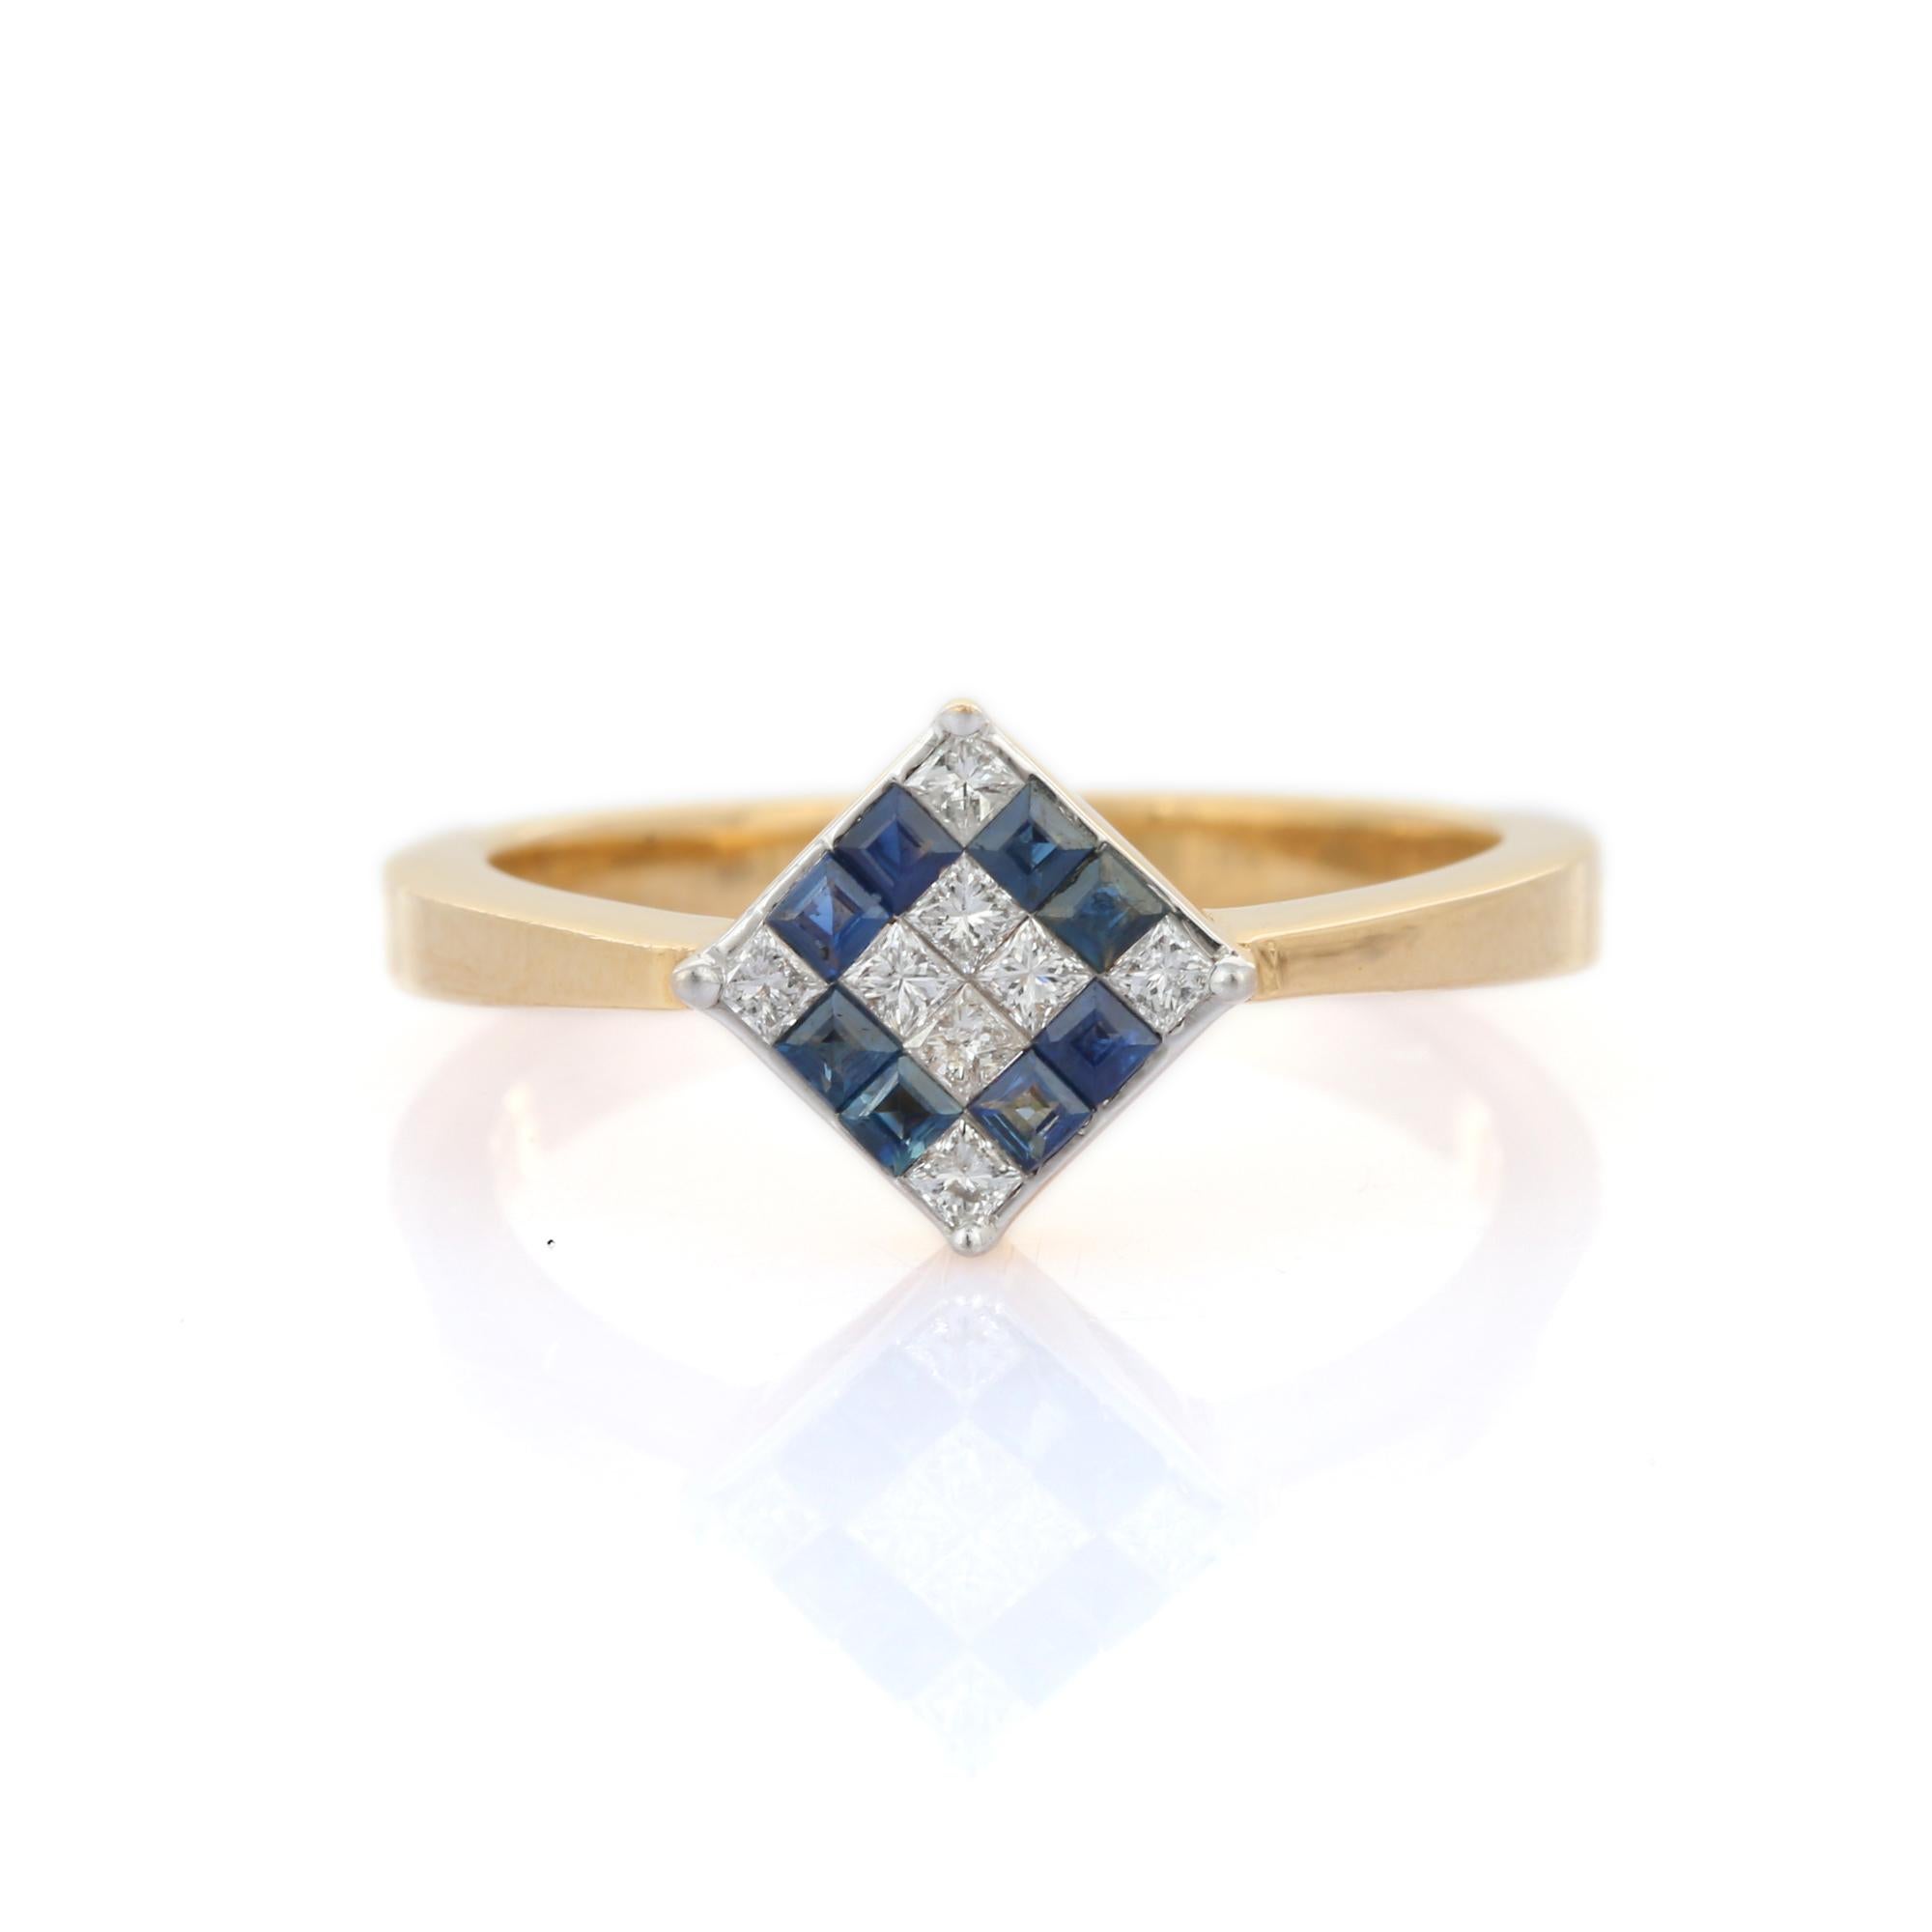 For Sale:  Blue Sapphire and Diamond Square Ring Studded in 18k Solid Yellow Gold  2